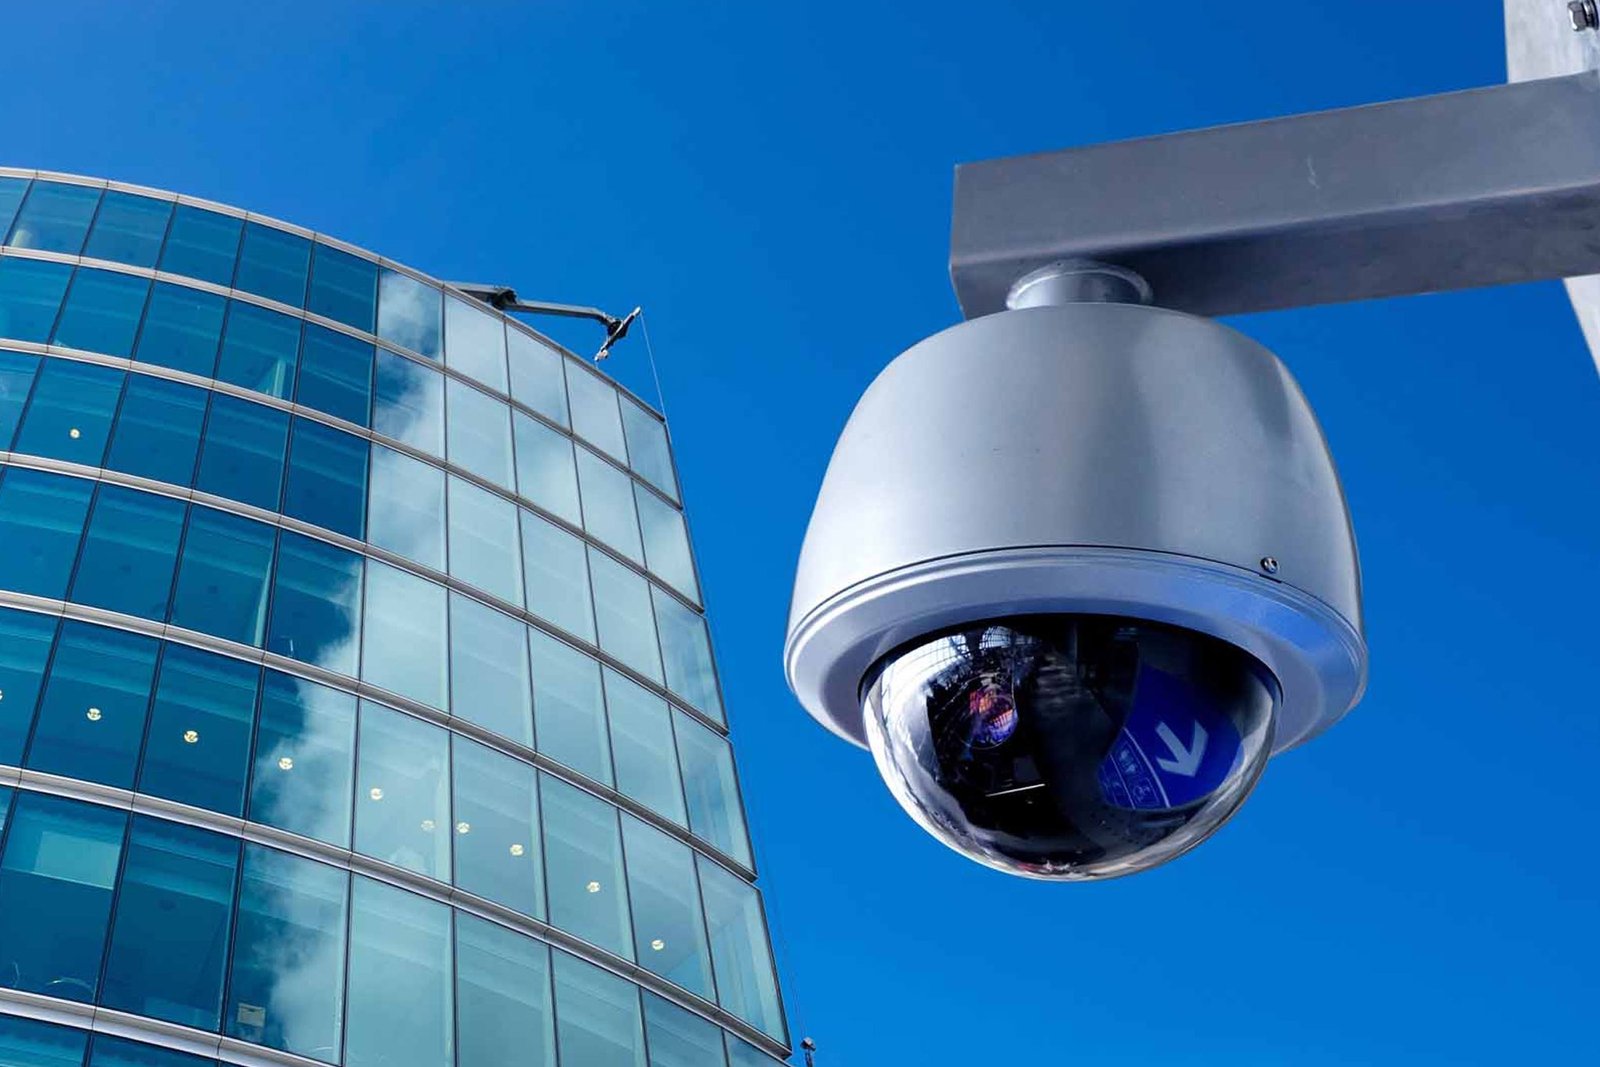 Your trusted OEM partner for surveillance solutions